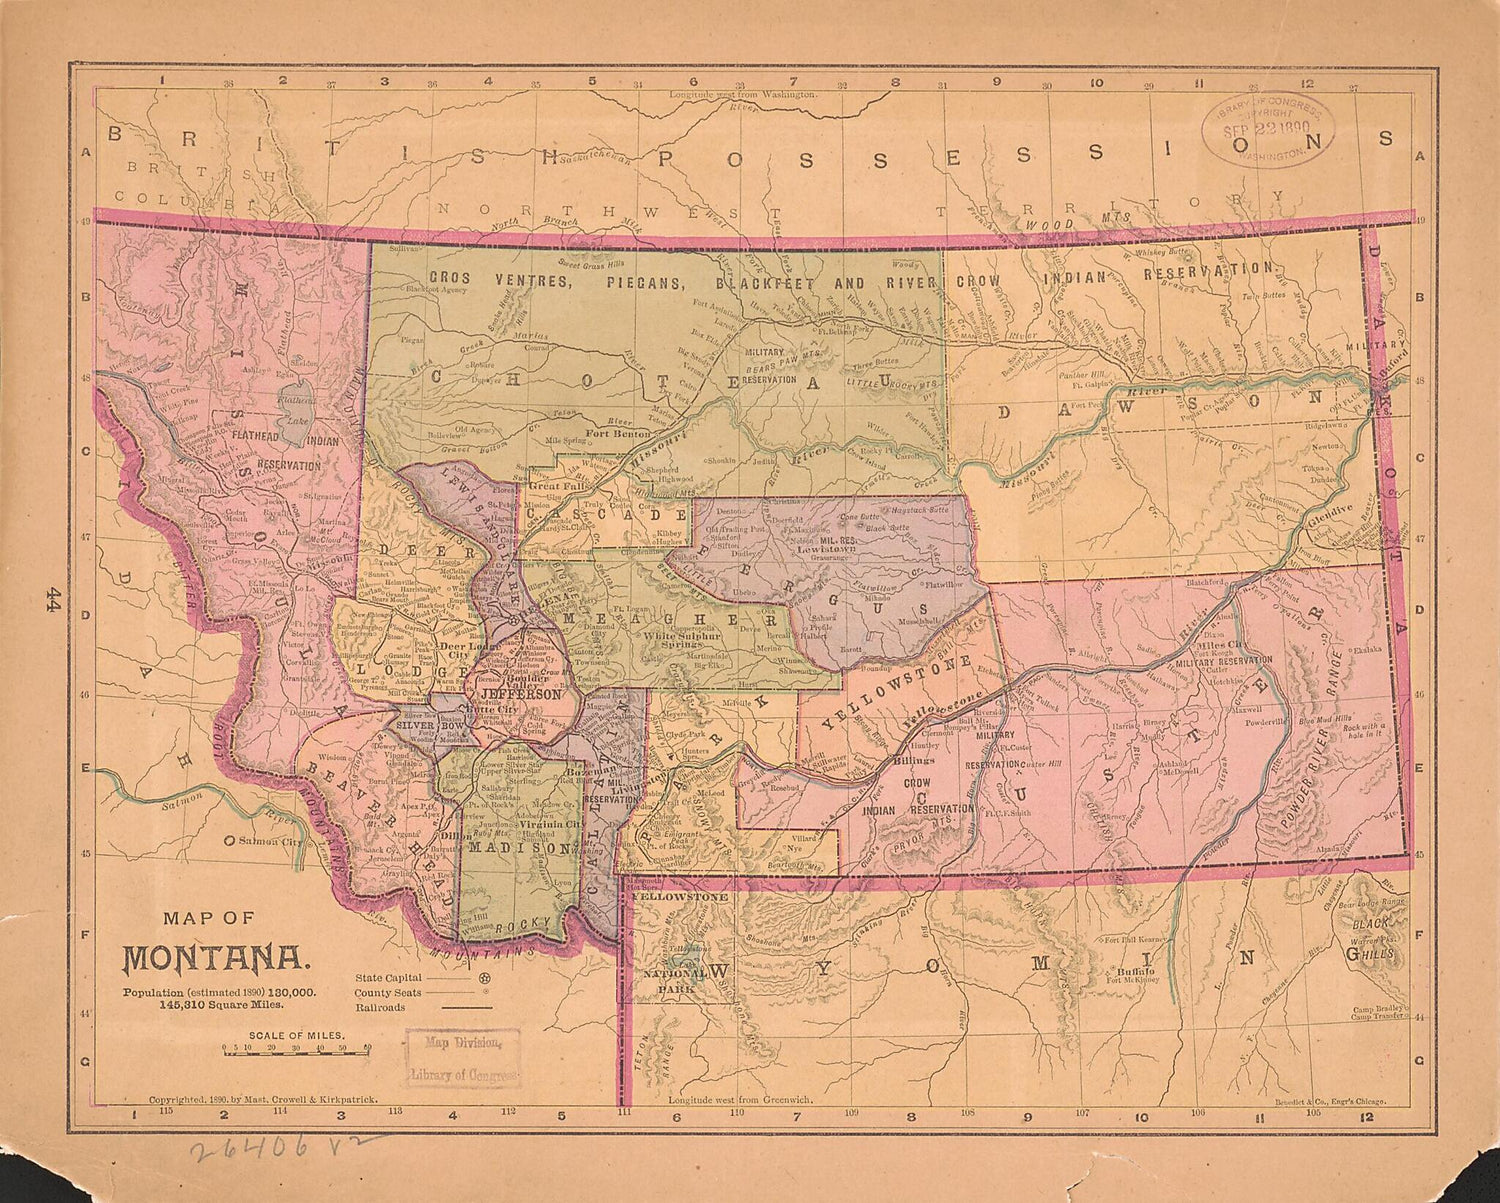 This old map of Map of Montana : Population (estimated from 1890) 130,000. 145,310 Square Miles was created by Ill.) Benedict &amp; Co. (Chicago, Crowell &amp; Kirkpatrick Mast in 1890